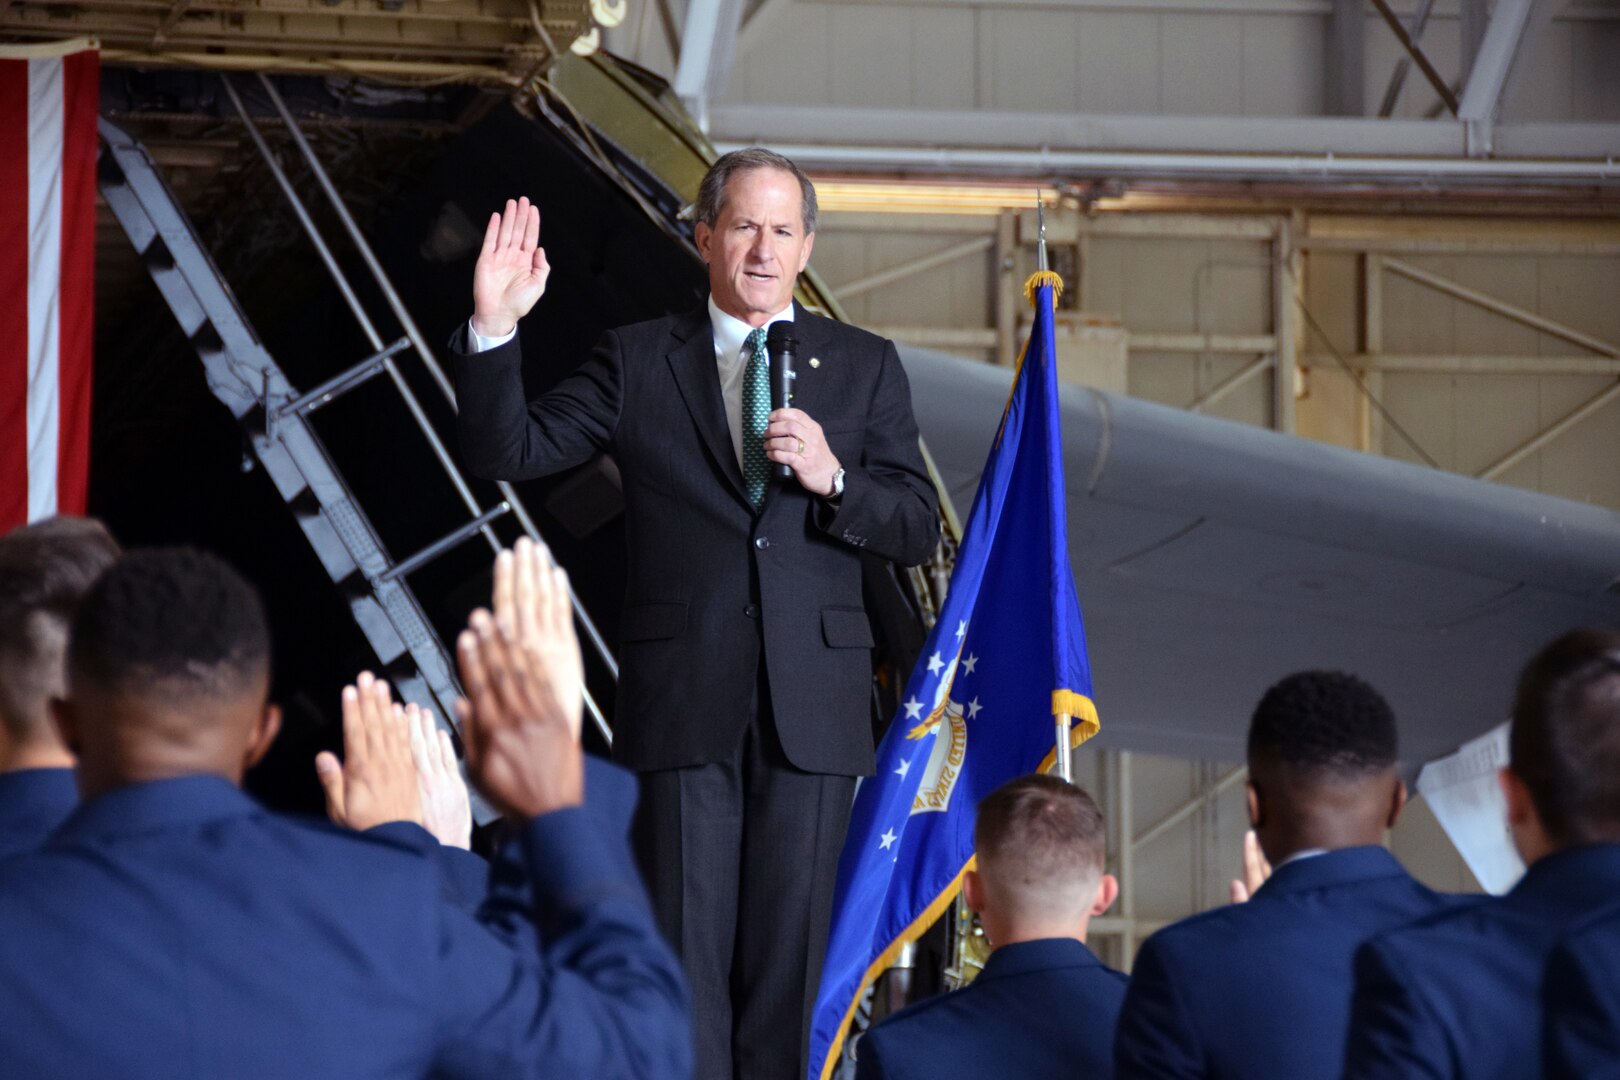 Retired Gen. David Goldfein, the 21st Chief of Staff of the Air Force, administers the Oath of Office to cadets during a commissioning ceremony at Joint Base San Antonio-Lackland, Texas May 14, 2021.